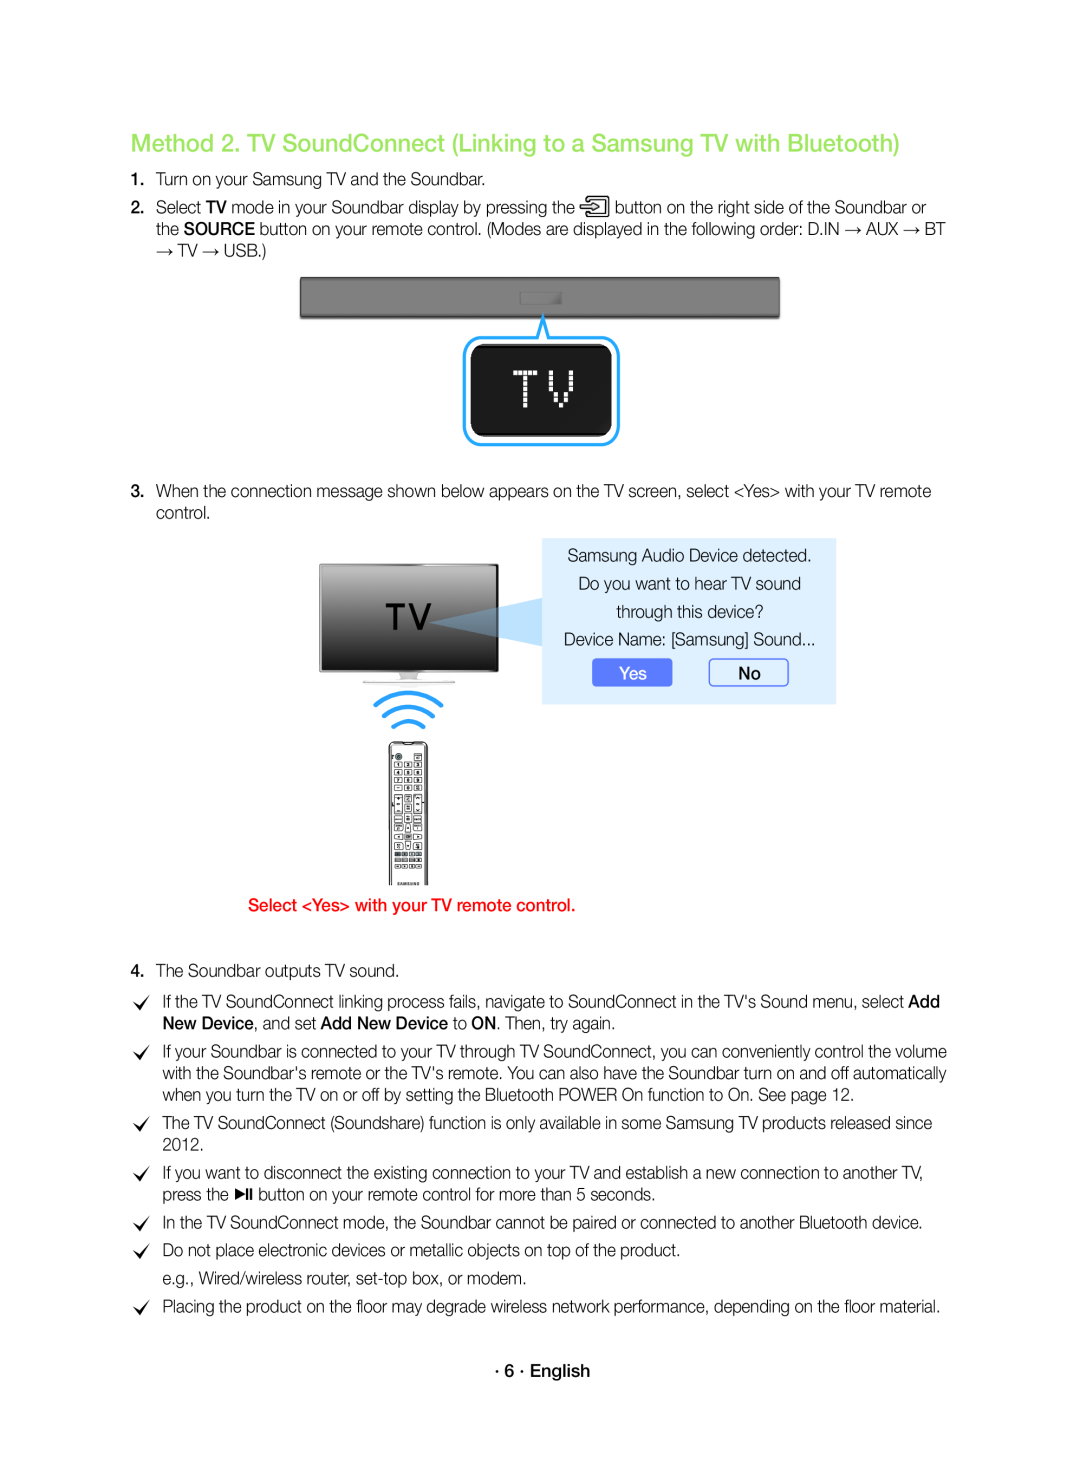 Method 2. TV SoundConnect (Linking to a Samsung TV with Bluetooth) Standard HW-K360